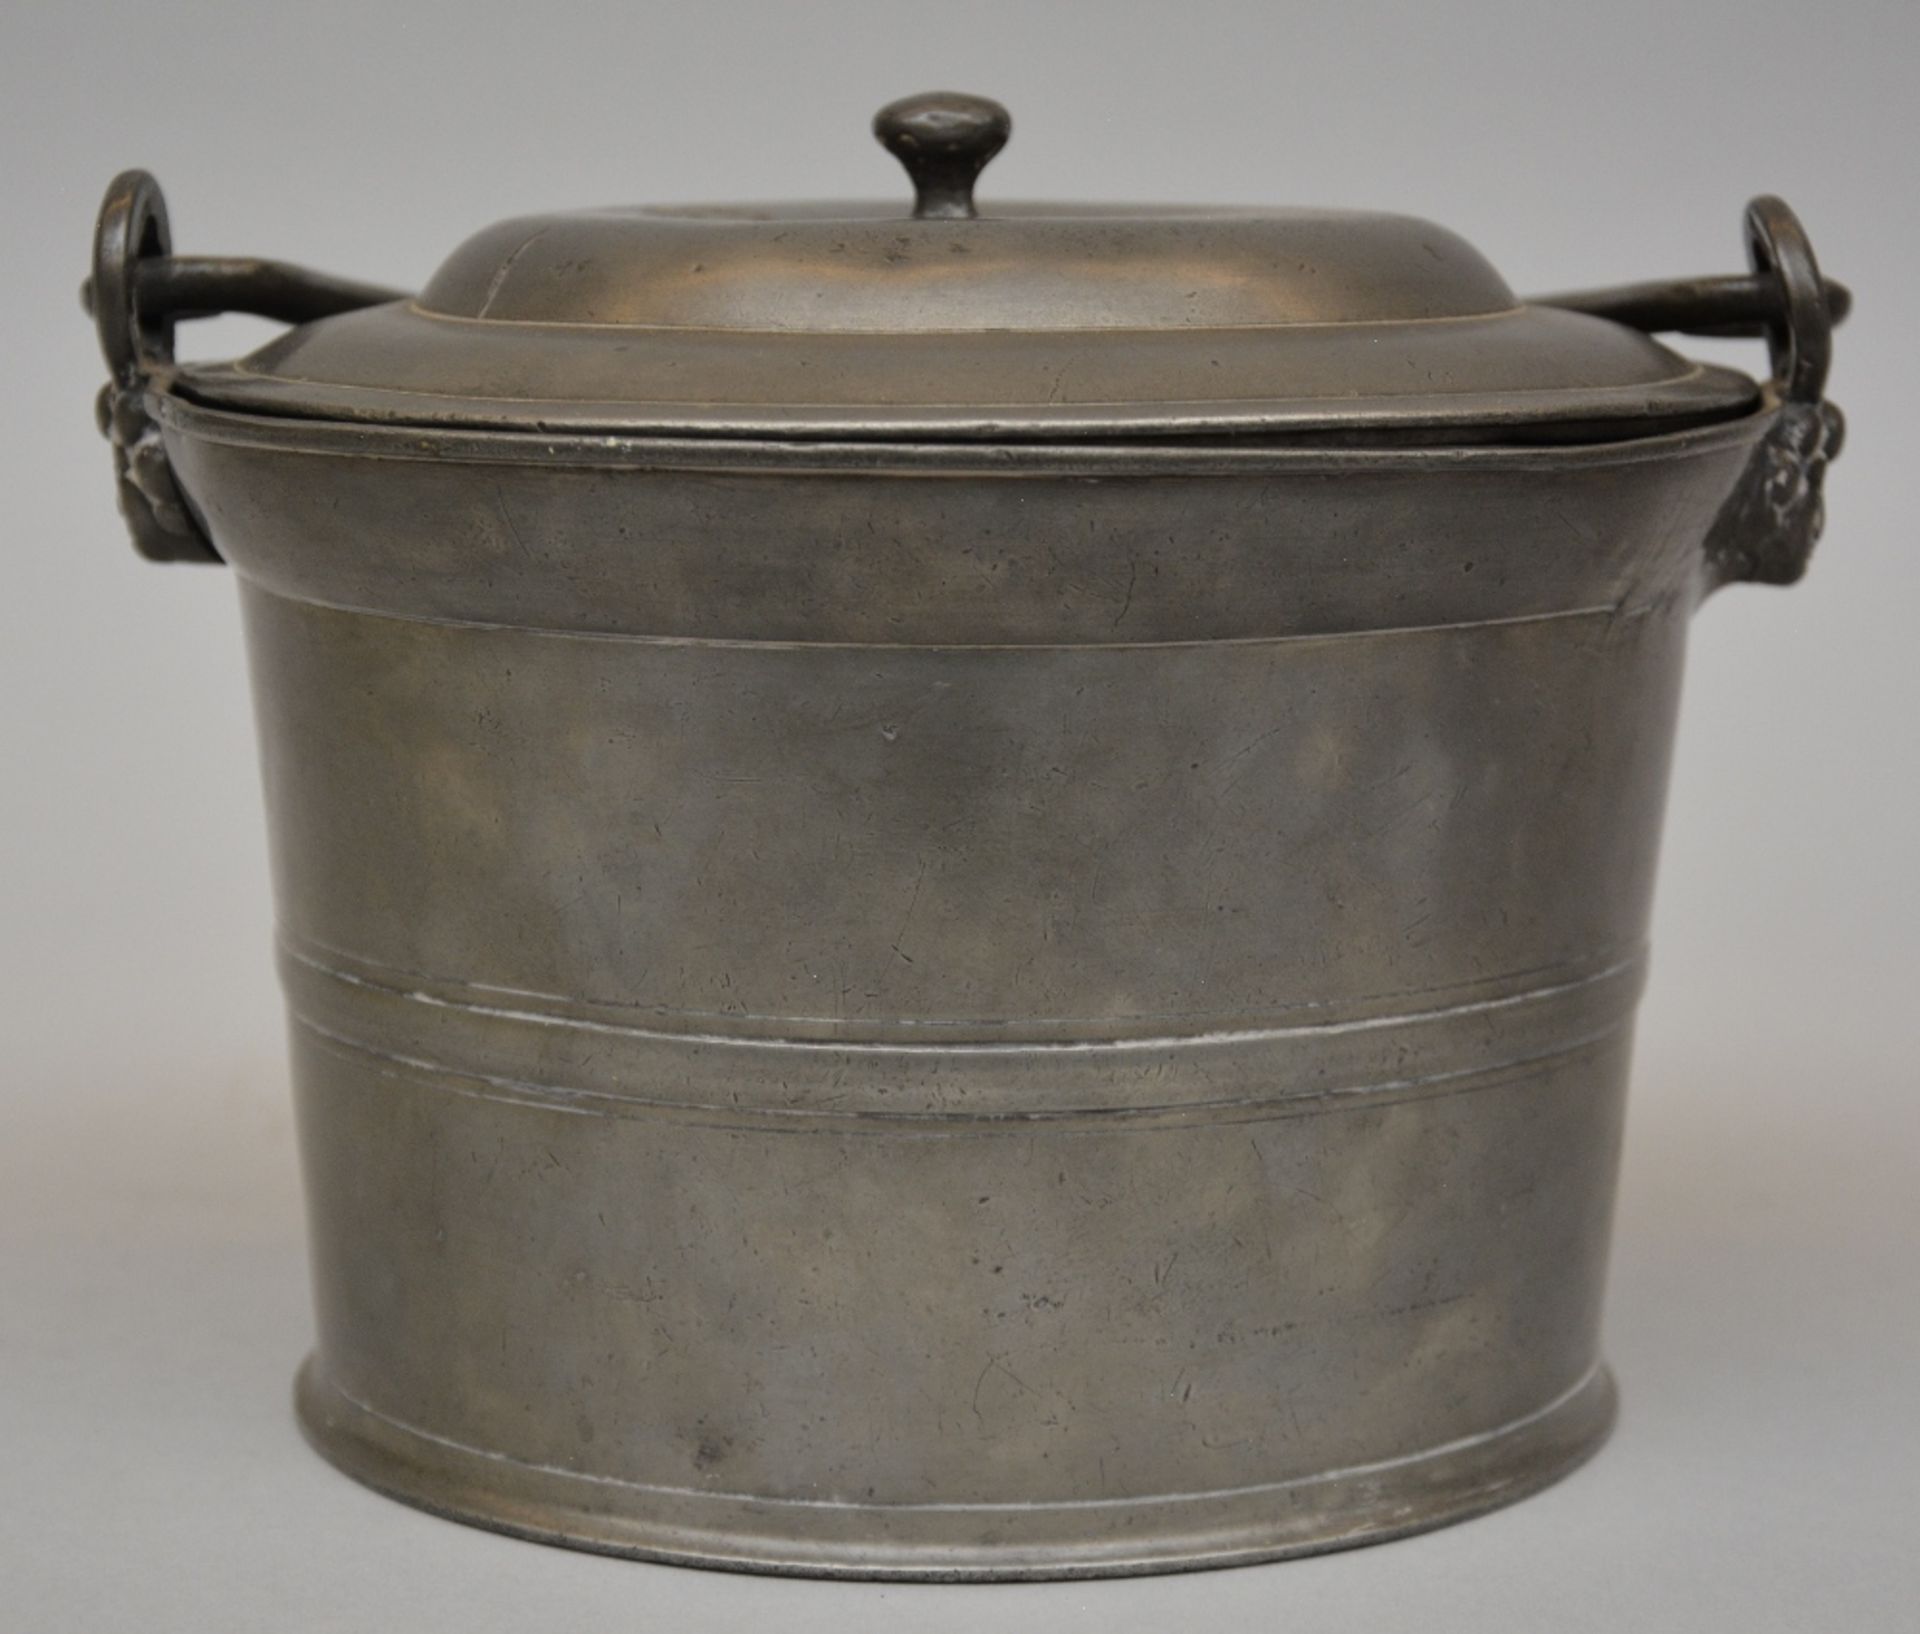 A 19thC French pewter feet warmer and a ditto food recipient, H 6 - W 26 - D 15cm / H 23 - - Bild 4 aus 9